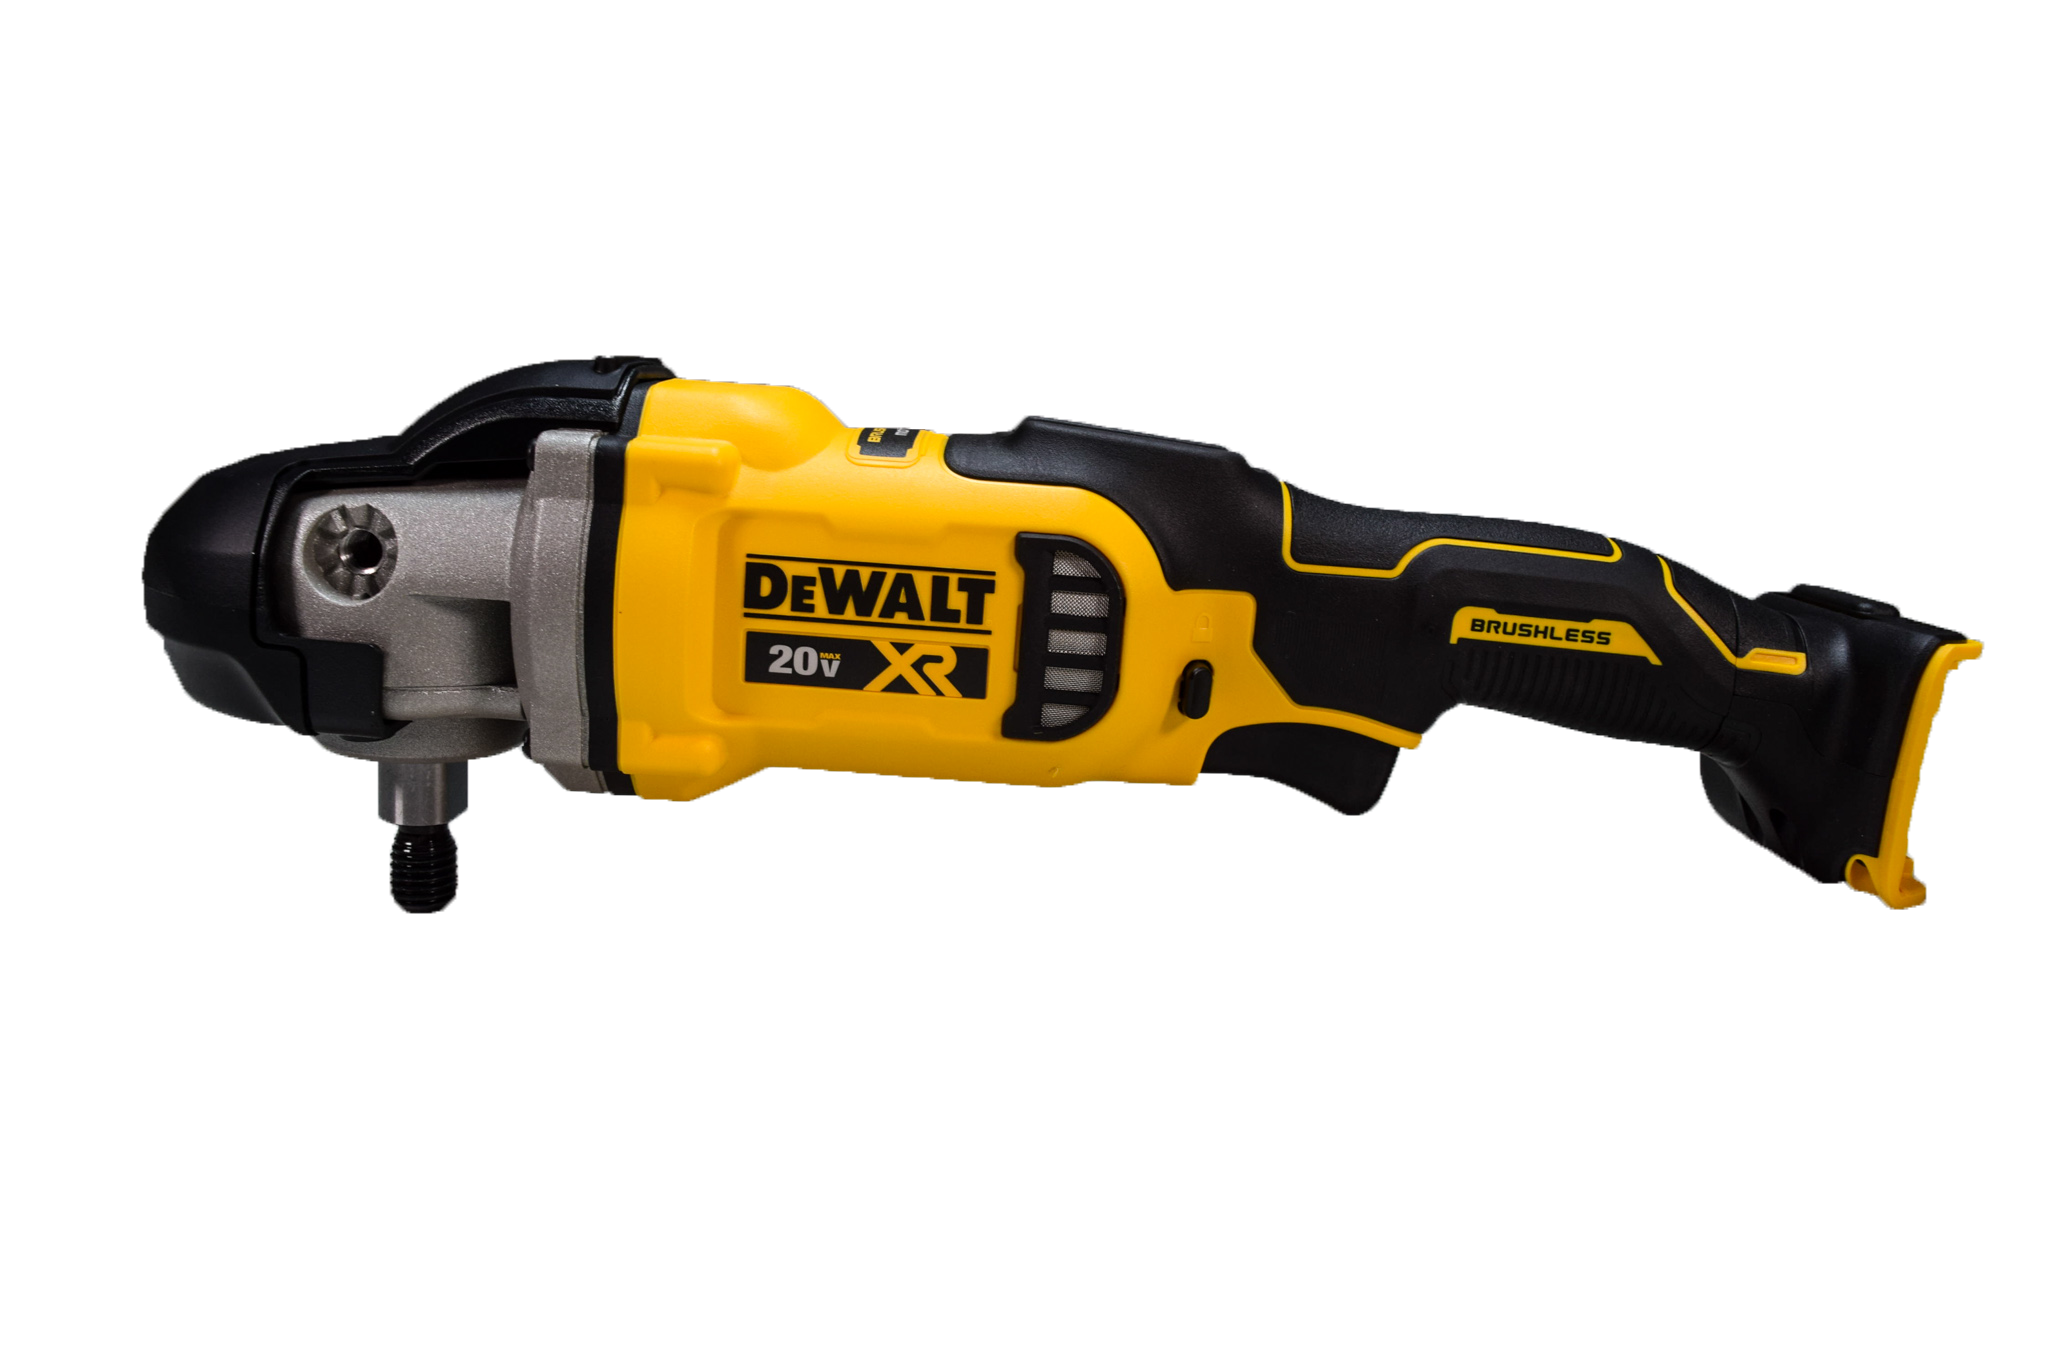 DEWALT 20V MAX XR Cordless Polisher, Rotary, Variable Speed, 7-Inch, 180 mm, Tool Only (DCM849B)